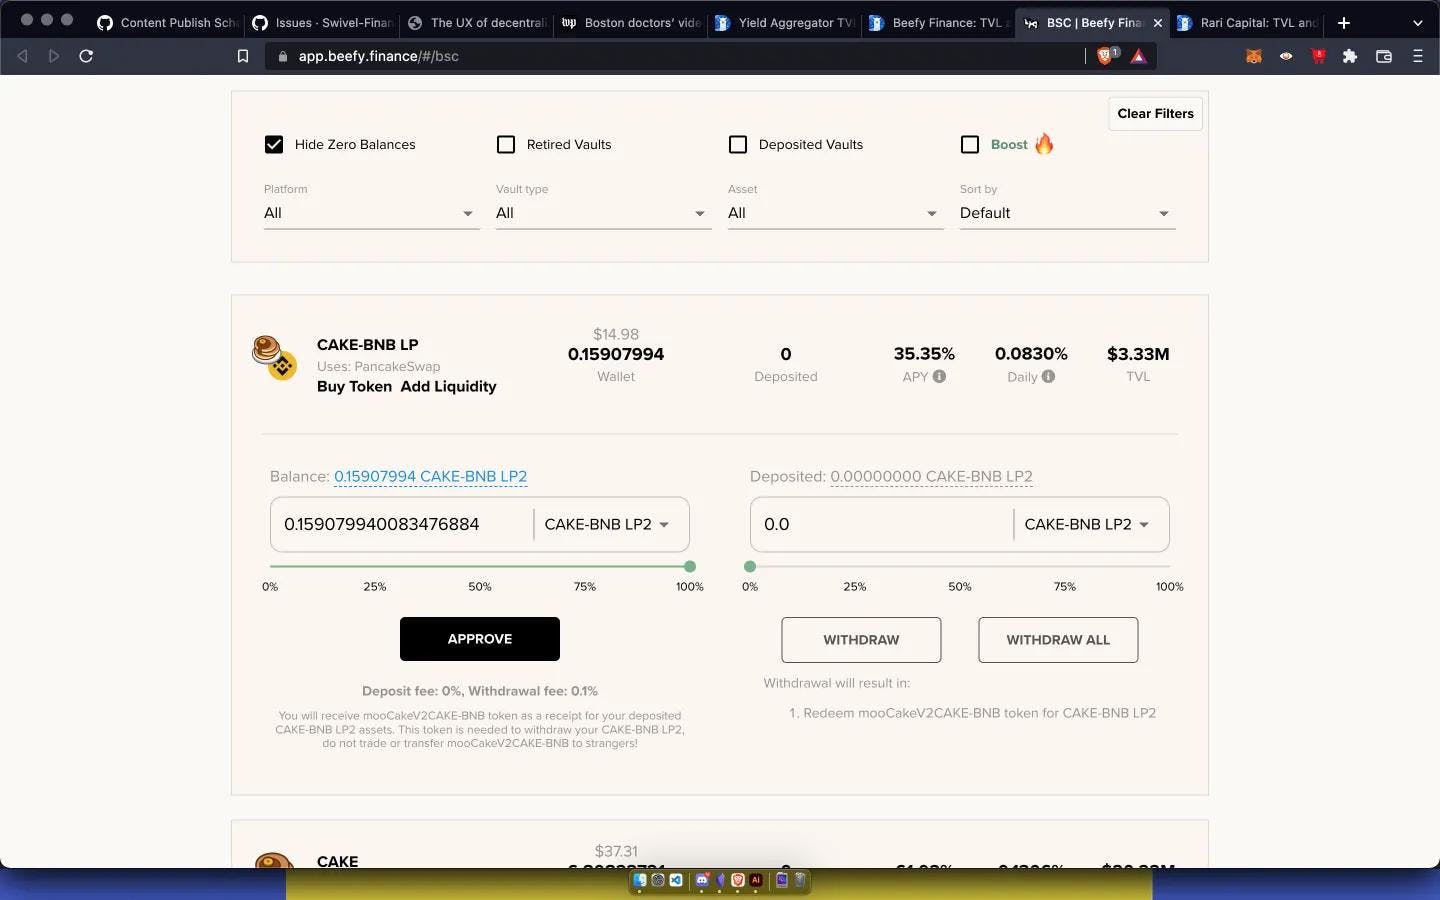 Screenshot image of a Cryptocurrency Liquidity Pool transaction interface